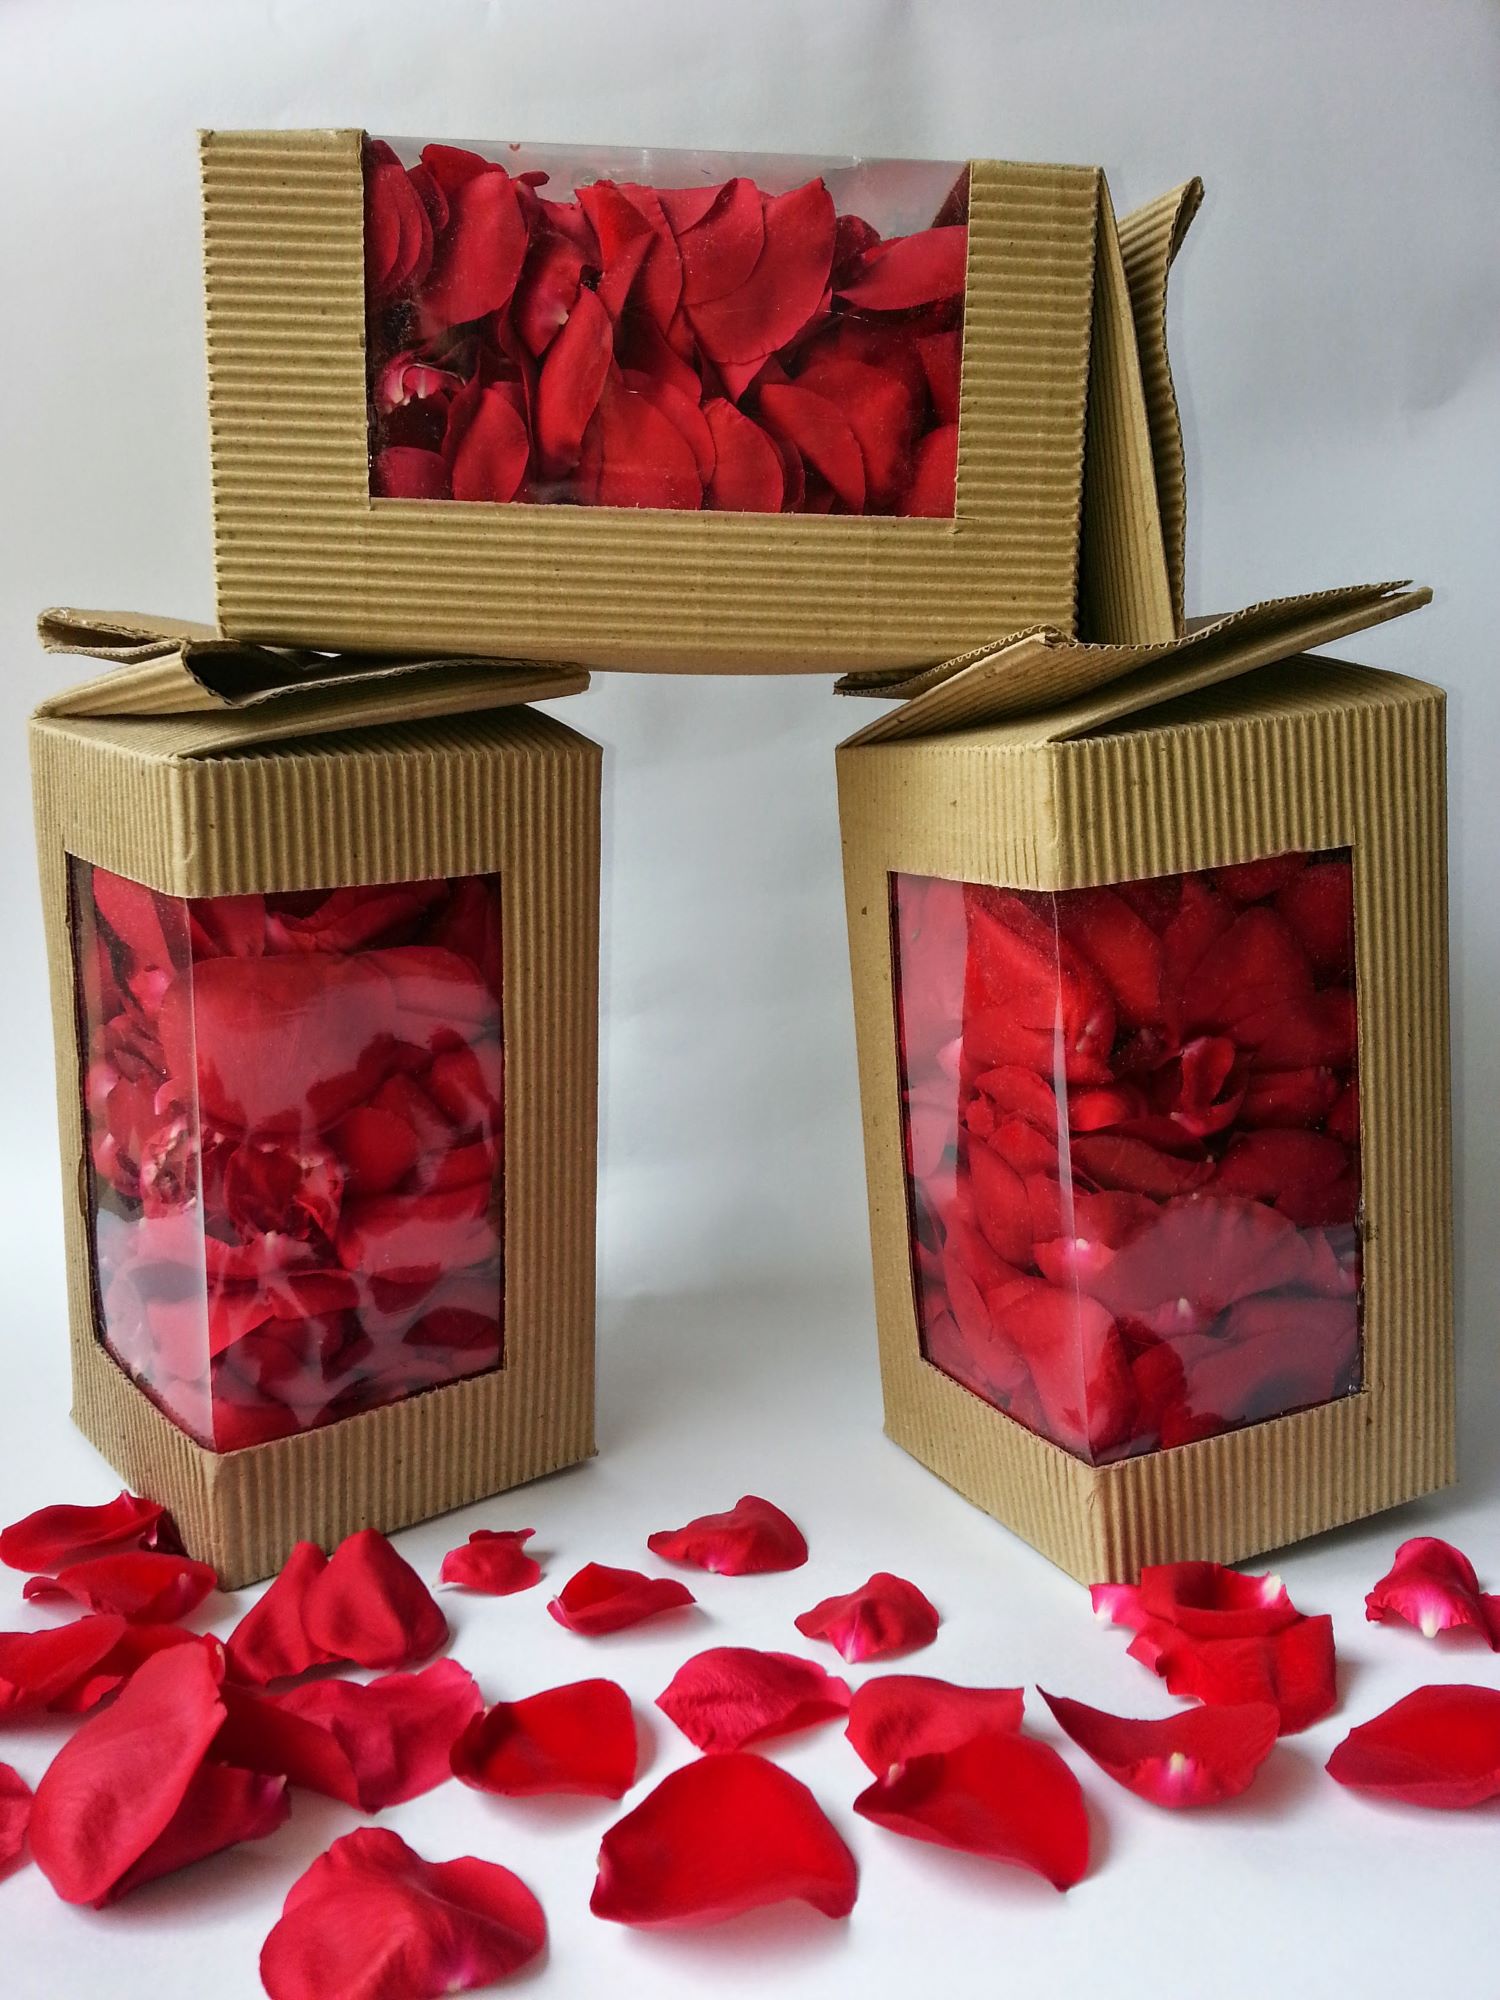 Edible Dried Flowers - Red Rose Petals- New Packaging with 25